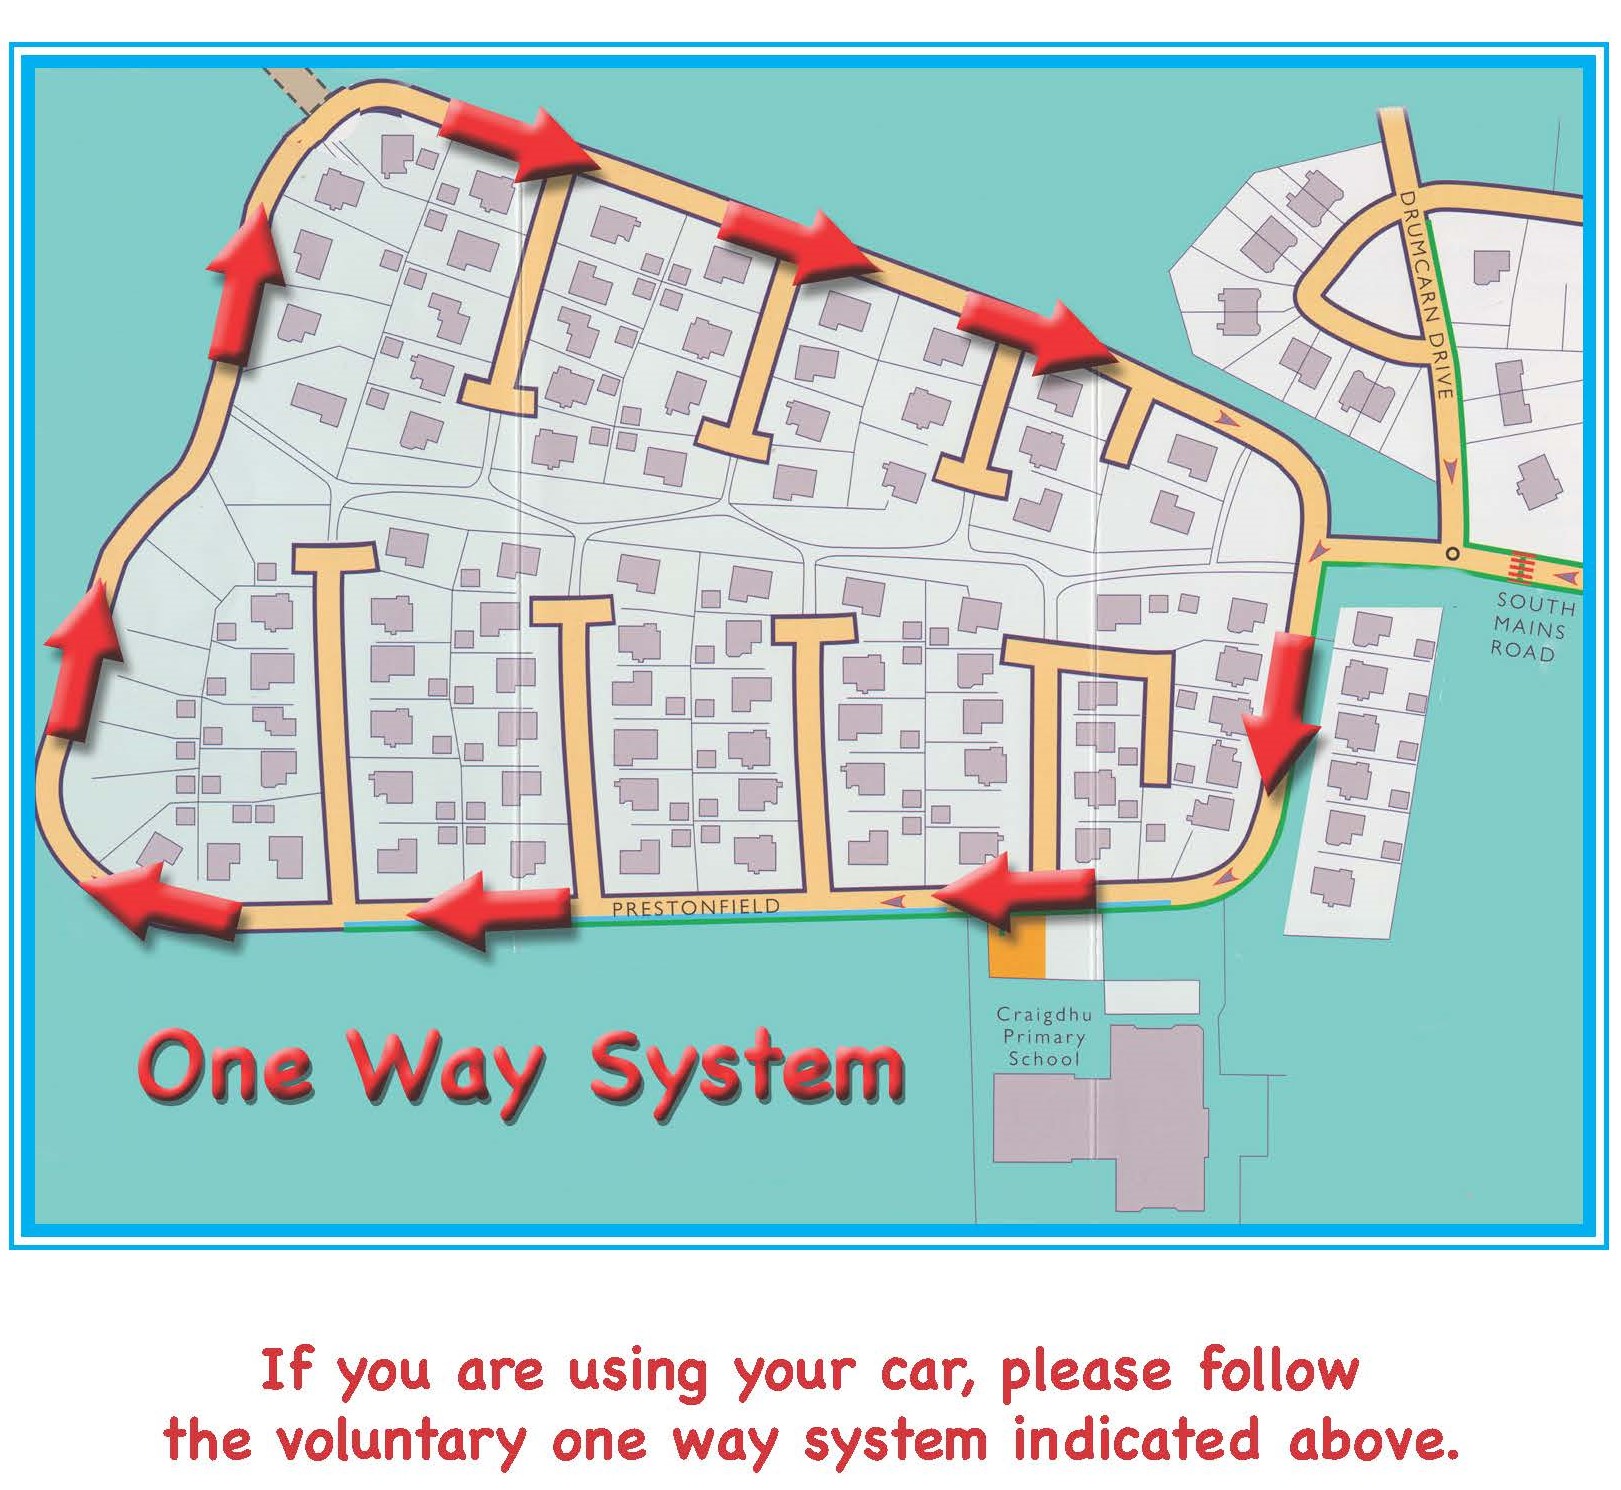 image of one way system